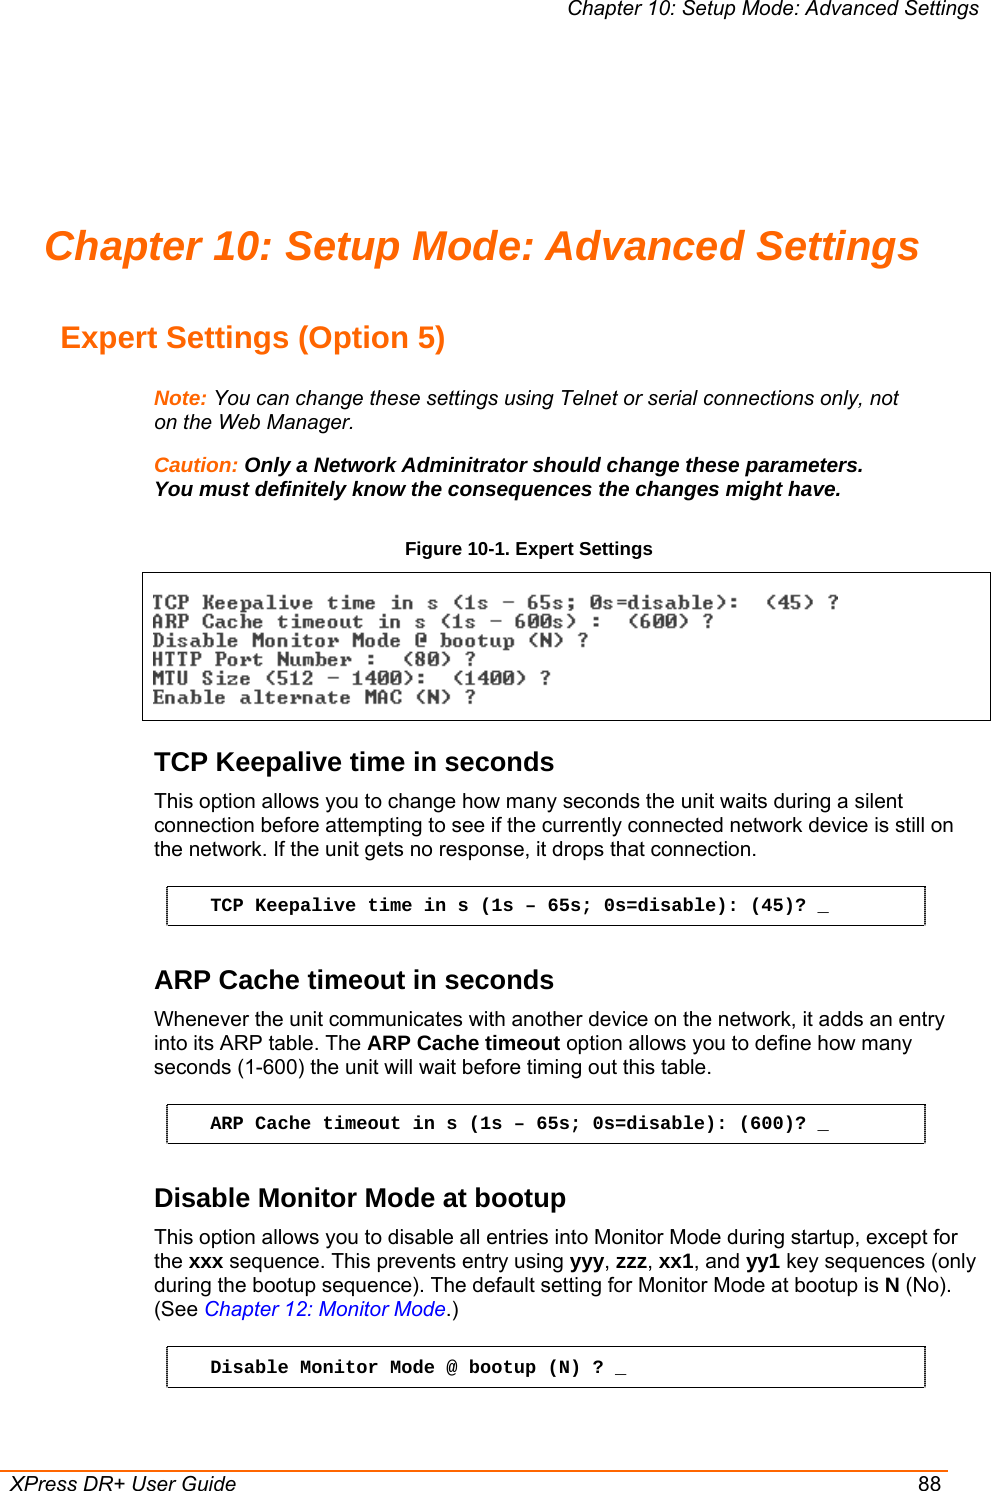 Chapter 10: Setup Mode: Advanced Settings  XPress DR+ User Guide  88 Chapter 10: Setup Mode: Advanced Settings Expert Settings (Option 5) Note: You can change these settings using Telnet or serial connections only, not on the Web Manager. Caution: Only a Network Adminitrator should change these parameters. You must definitely know the consequences the changes might have. Figure 10-1. Expert Settings  TCP Keepalive time in seconds  This option allows you to change how many seconds the unit waits during a silent connection before attempting to see if the currently connected network device is still on the network. If the unit gets no response, it drops that connection. TCP Keepalive time in s (1s – 65s; 0s=disable): (45)? _ ARP Cache timeout in seconds Whenever the unit communicates with another device on the network, it adds an entry into its ARP table. The ARP Cache timeout option allows you to define how many seconds (1-600) the unit will wait before timing out this table.  ARP Cache timeout in s (1s – 65s; 0s=disable): (600)? _ Disable Monitor Mode at bootup This option allows you to disable all entries into Monitor Mode during startup, except for the xxx sequence. This prevents entry using yyy, zzz, xx1, and yy1 key sequences (only during the bootup sequence). The default setting for Monitor Mode at bootup is N (No). (See Chapter 12: Monitor Mode.)  Disable Monitor Mode @ bootup (N) ? _ 